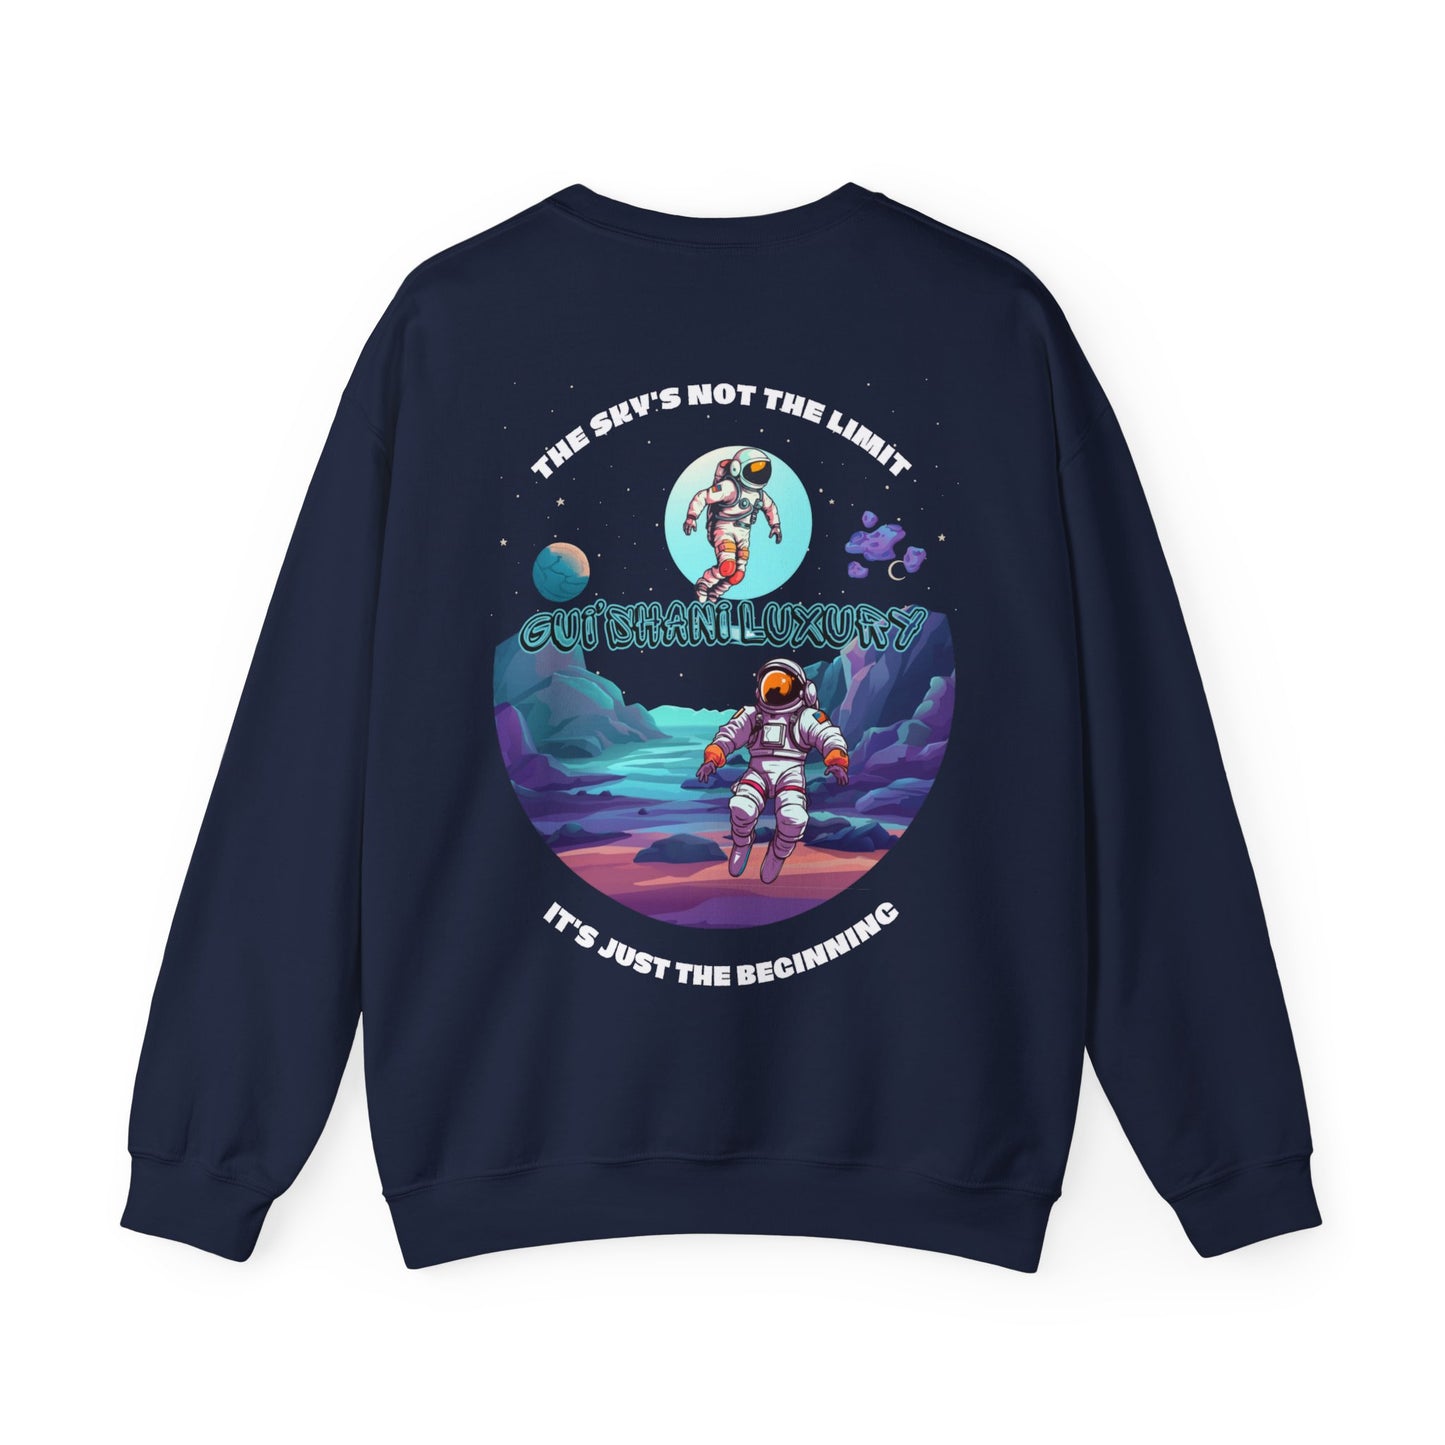 The Sky is just the Beginning Crewneck